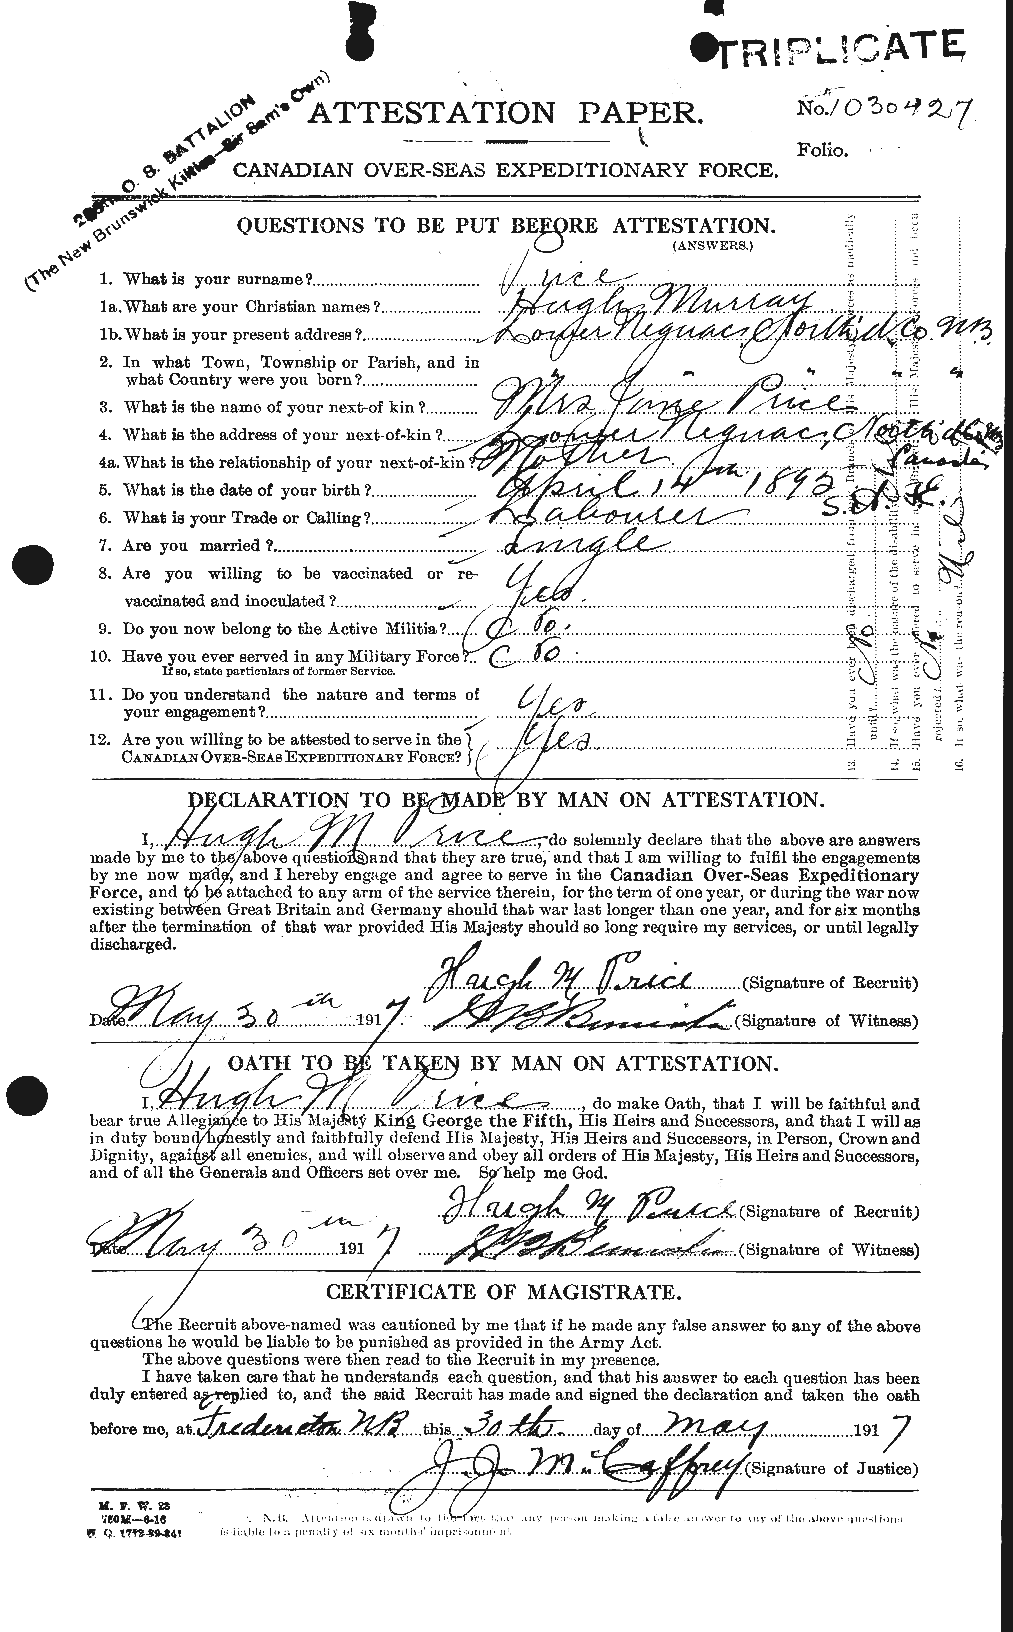 Personnel Records of the First World War - CEF 587182a